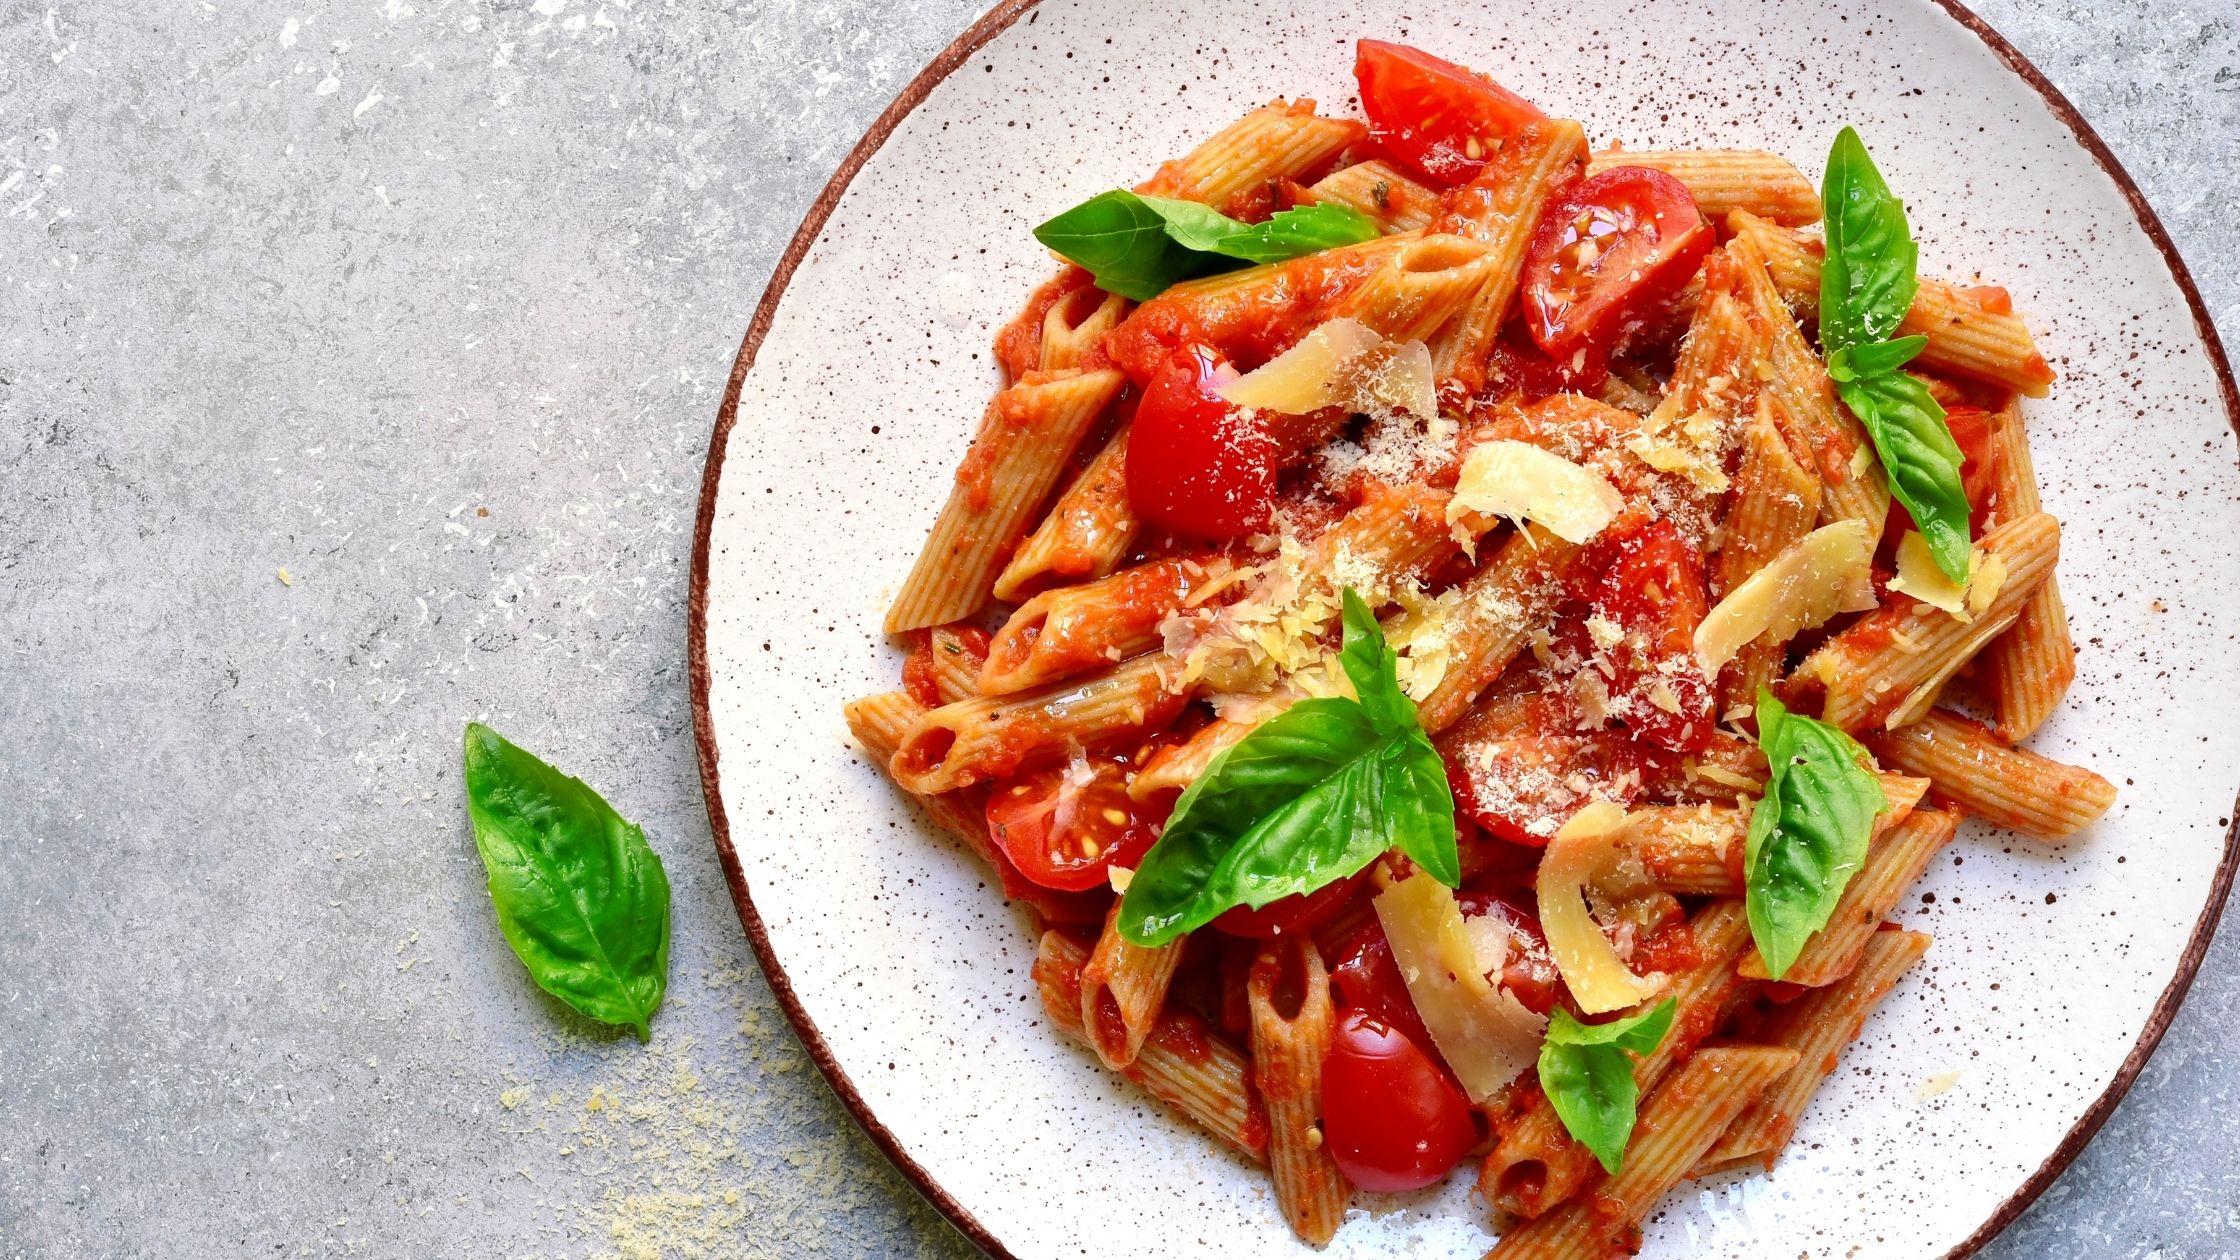 Whole Wheat Pasta with Tomato and Basil